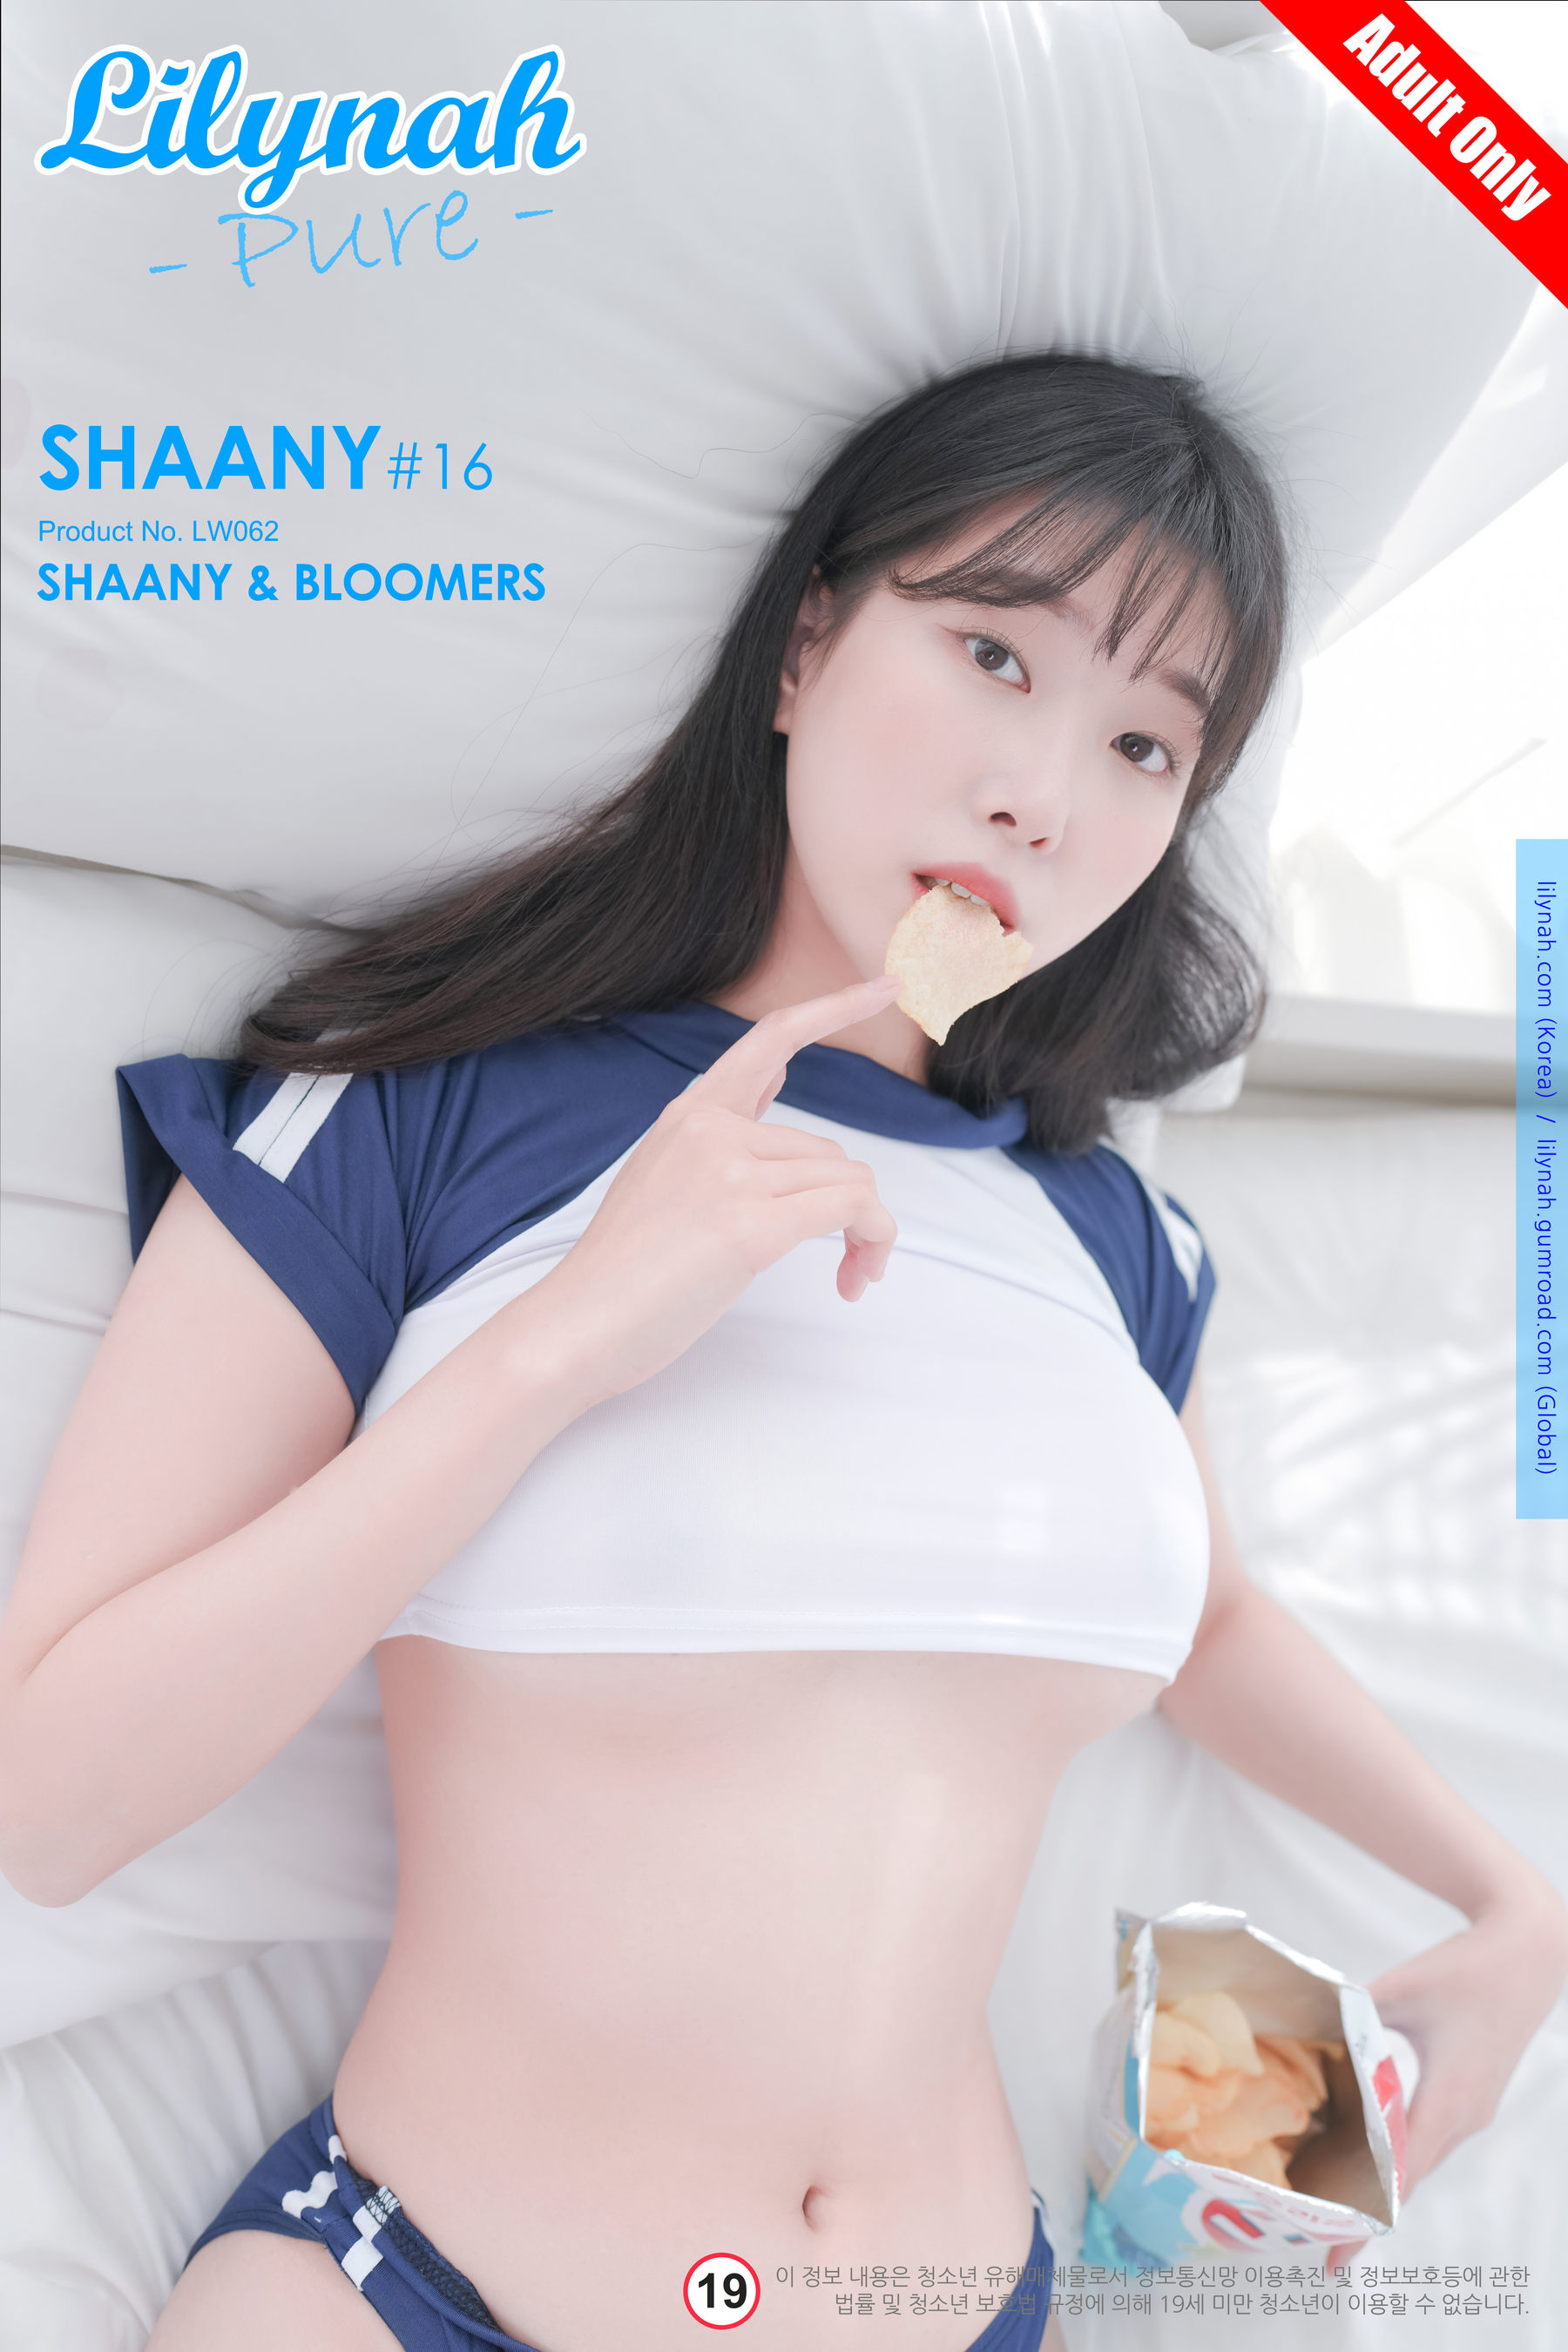 [Lilynah] Shaany - Vol.16 &amp; Bloomers  第2张